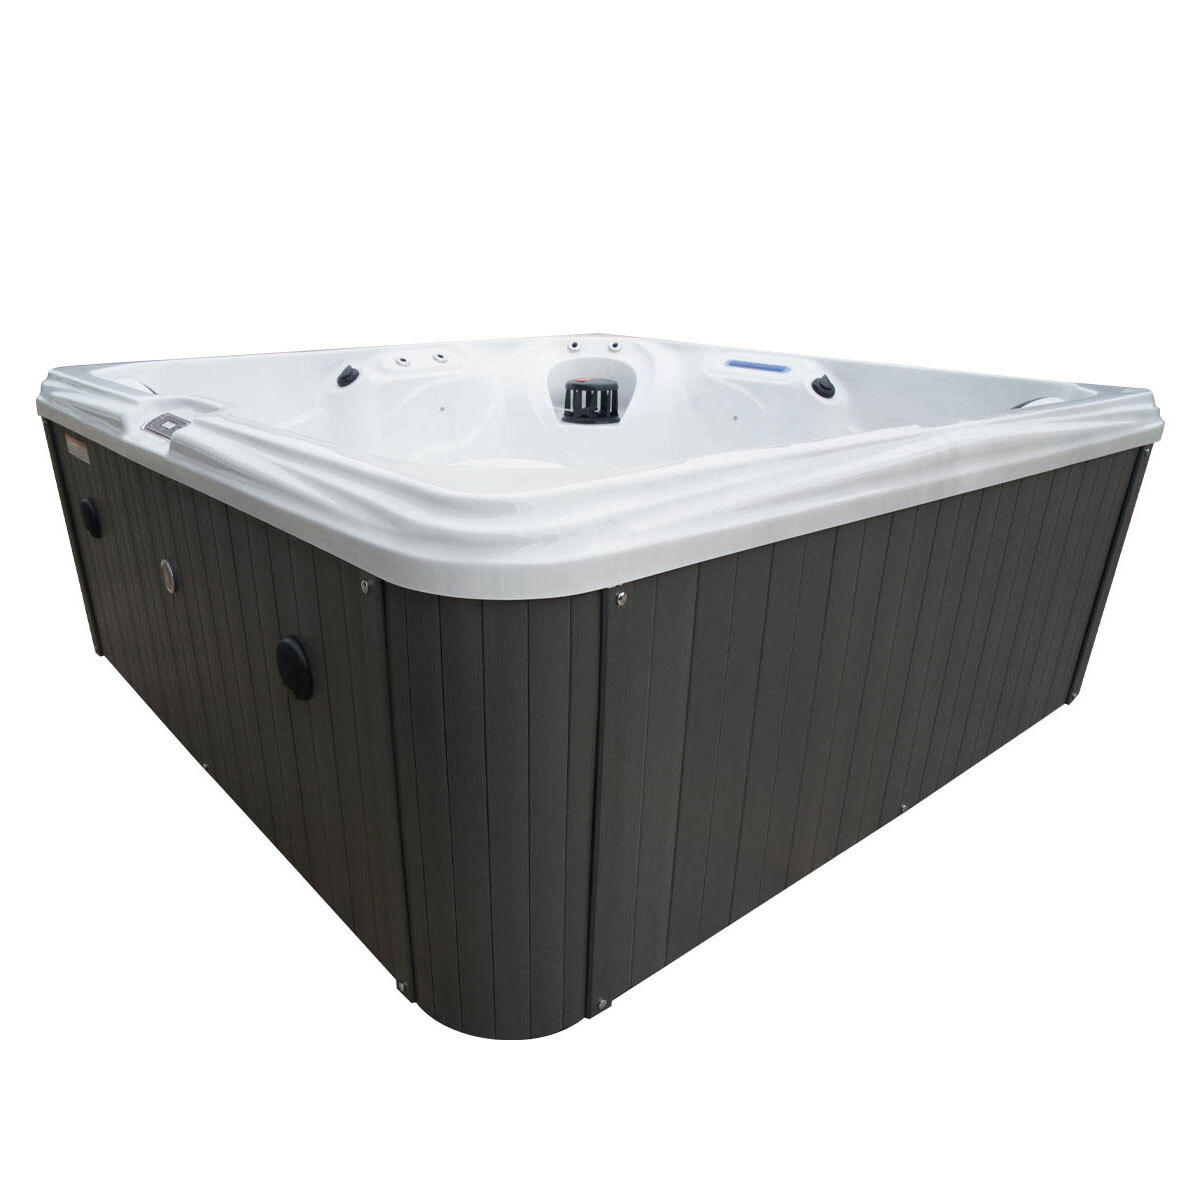 Blue Whale Spa Summer Lake 53-Jet 5 Person Hot Tub - Delivered and Installed